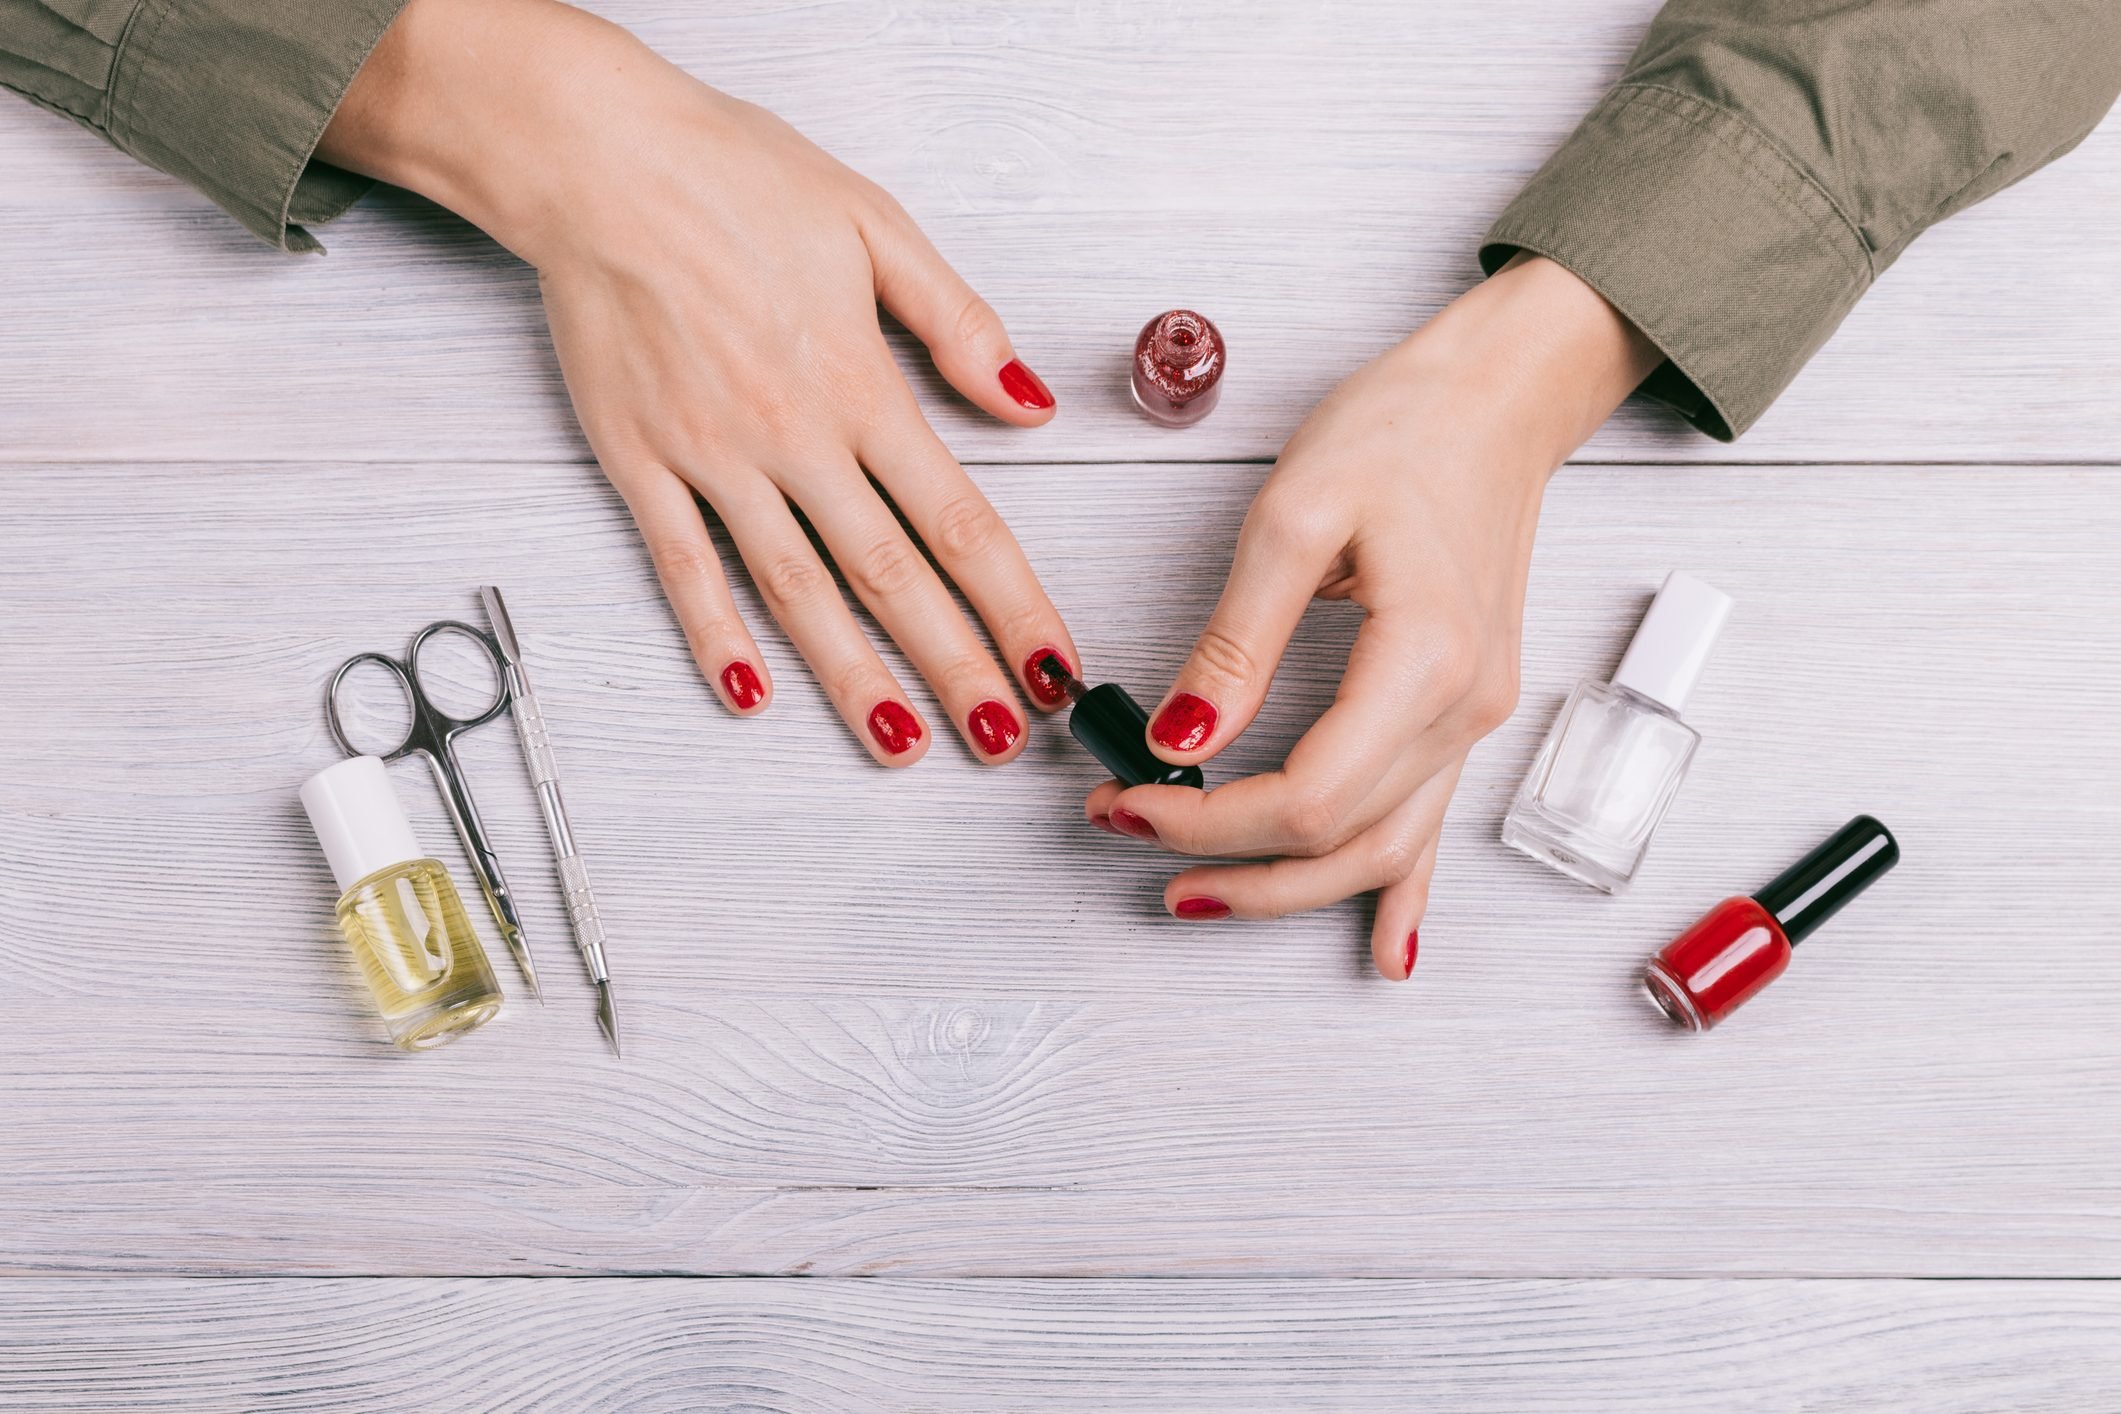 9 Steps for the Best Manicure at Home | How to Give Yourself a Manicure